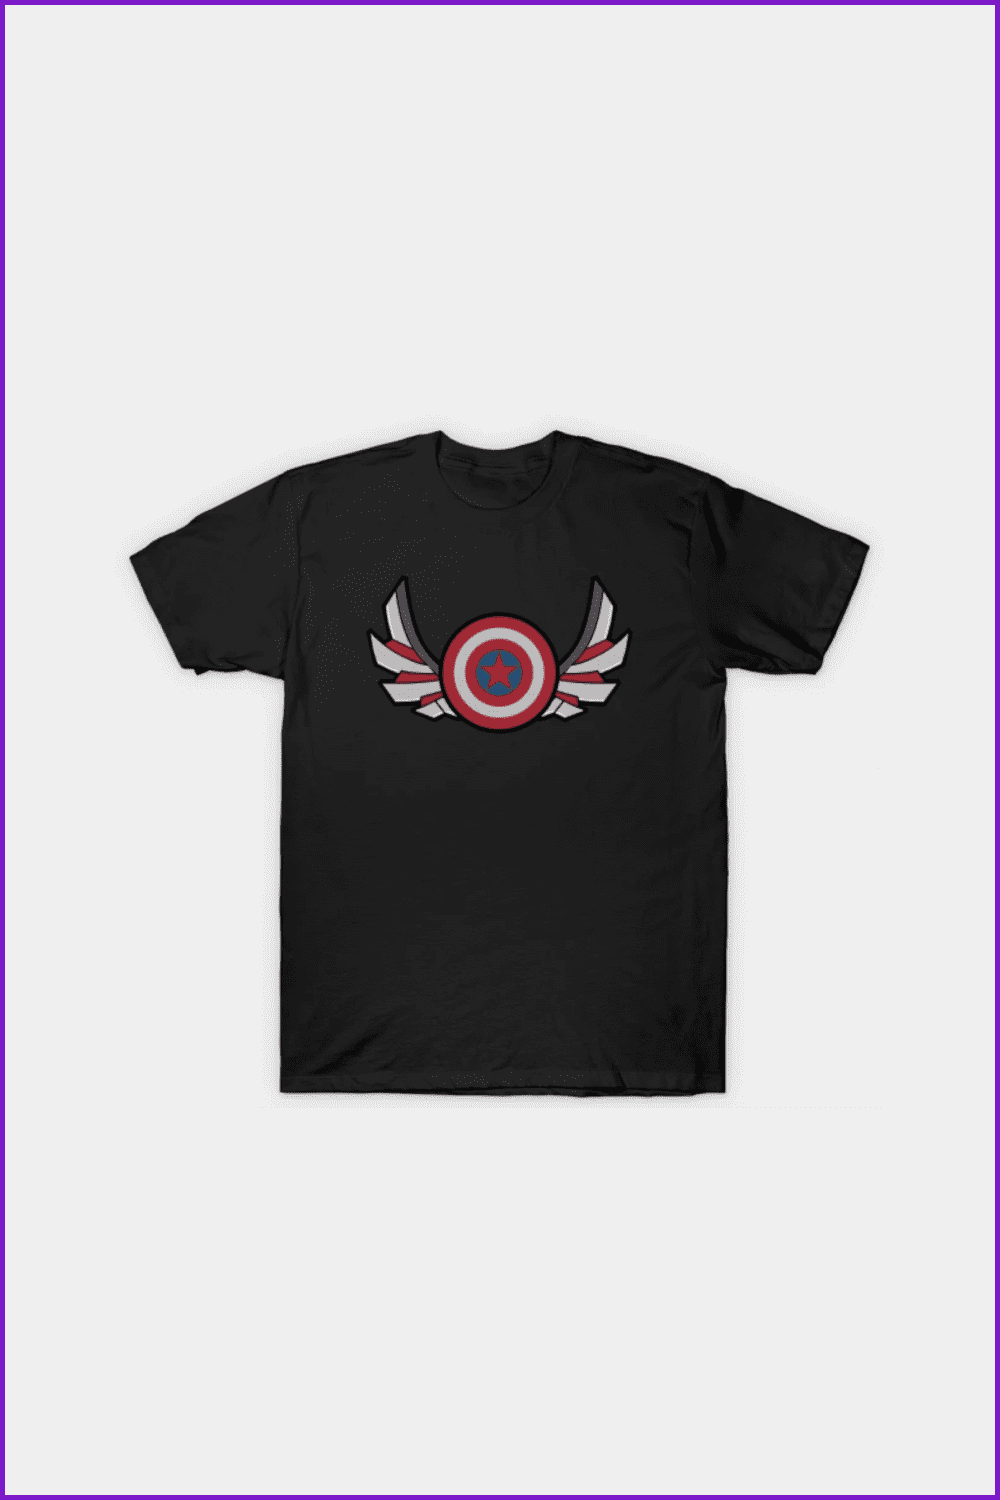 Falcon and the Winter Soldier T-Shirt.